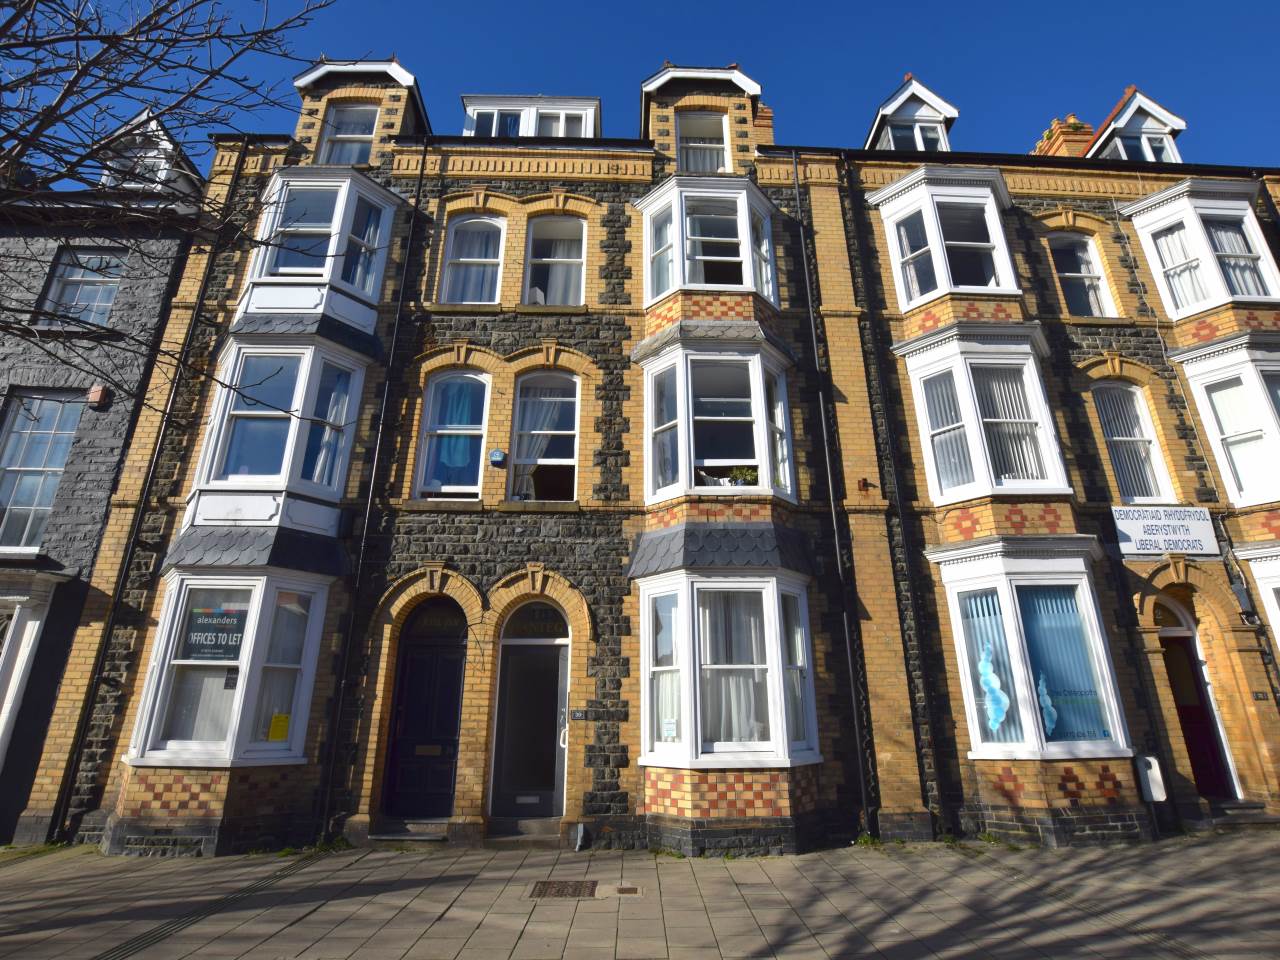 1 bed flat to rent in Aberystwyth, Ceredigion  - Property Image 1